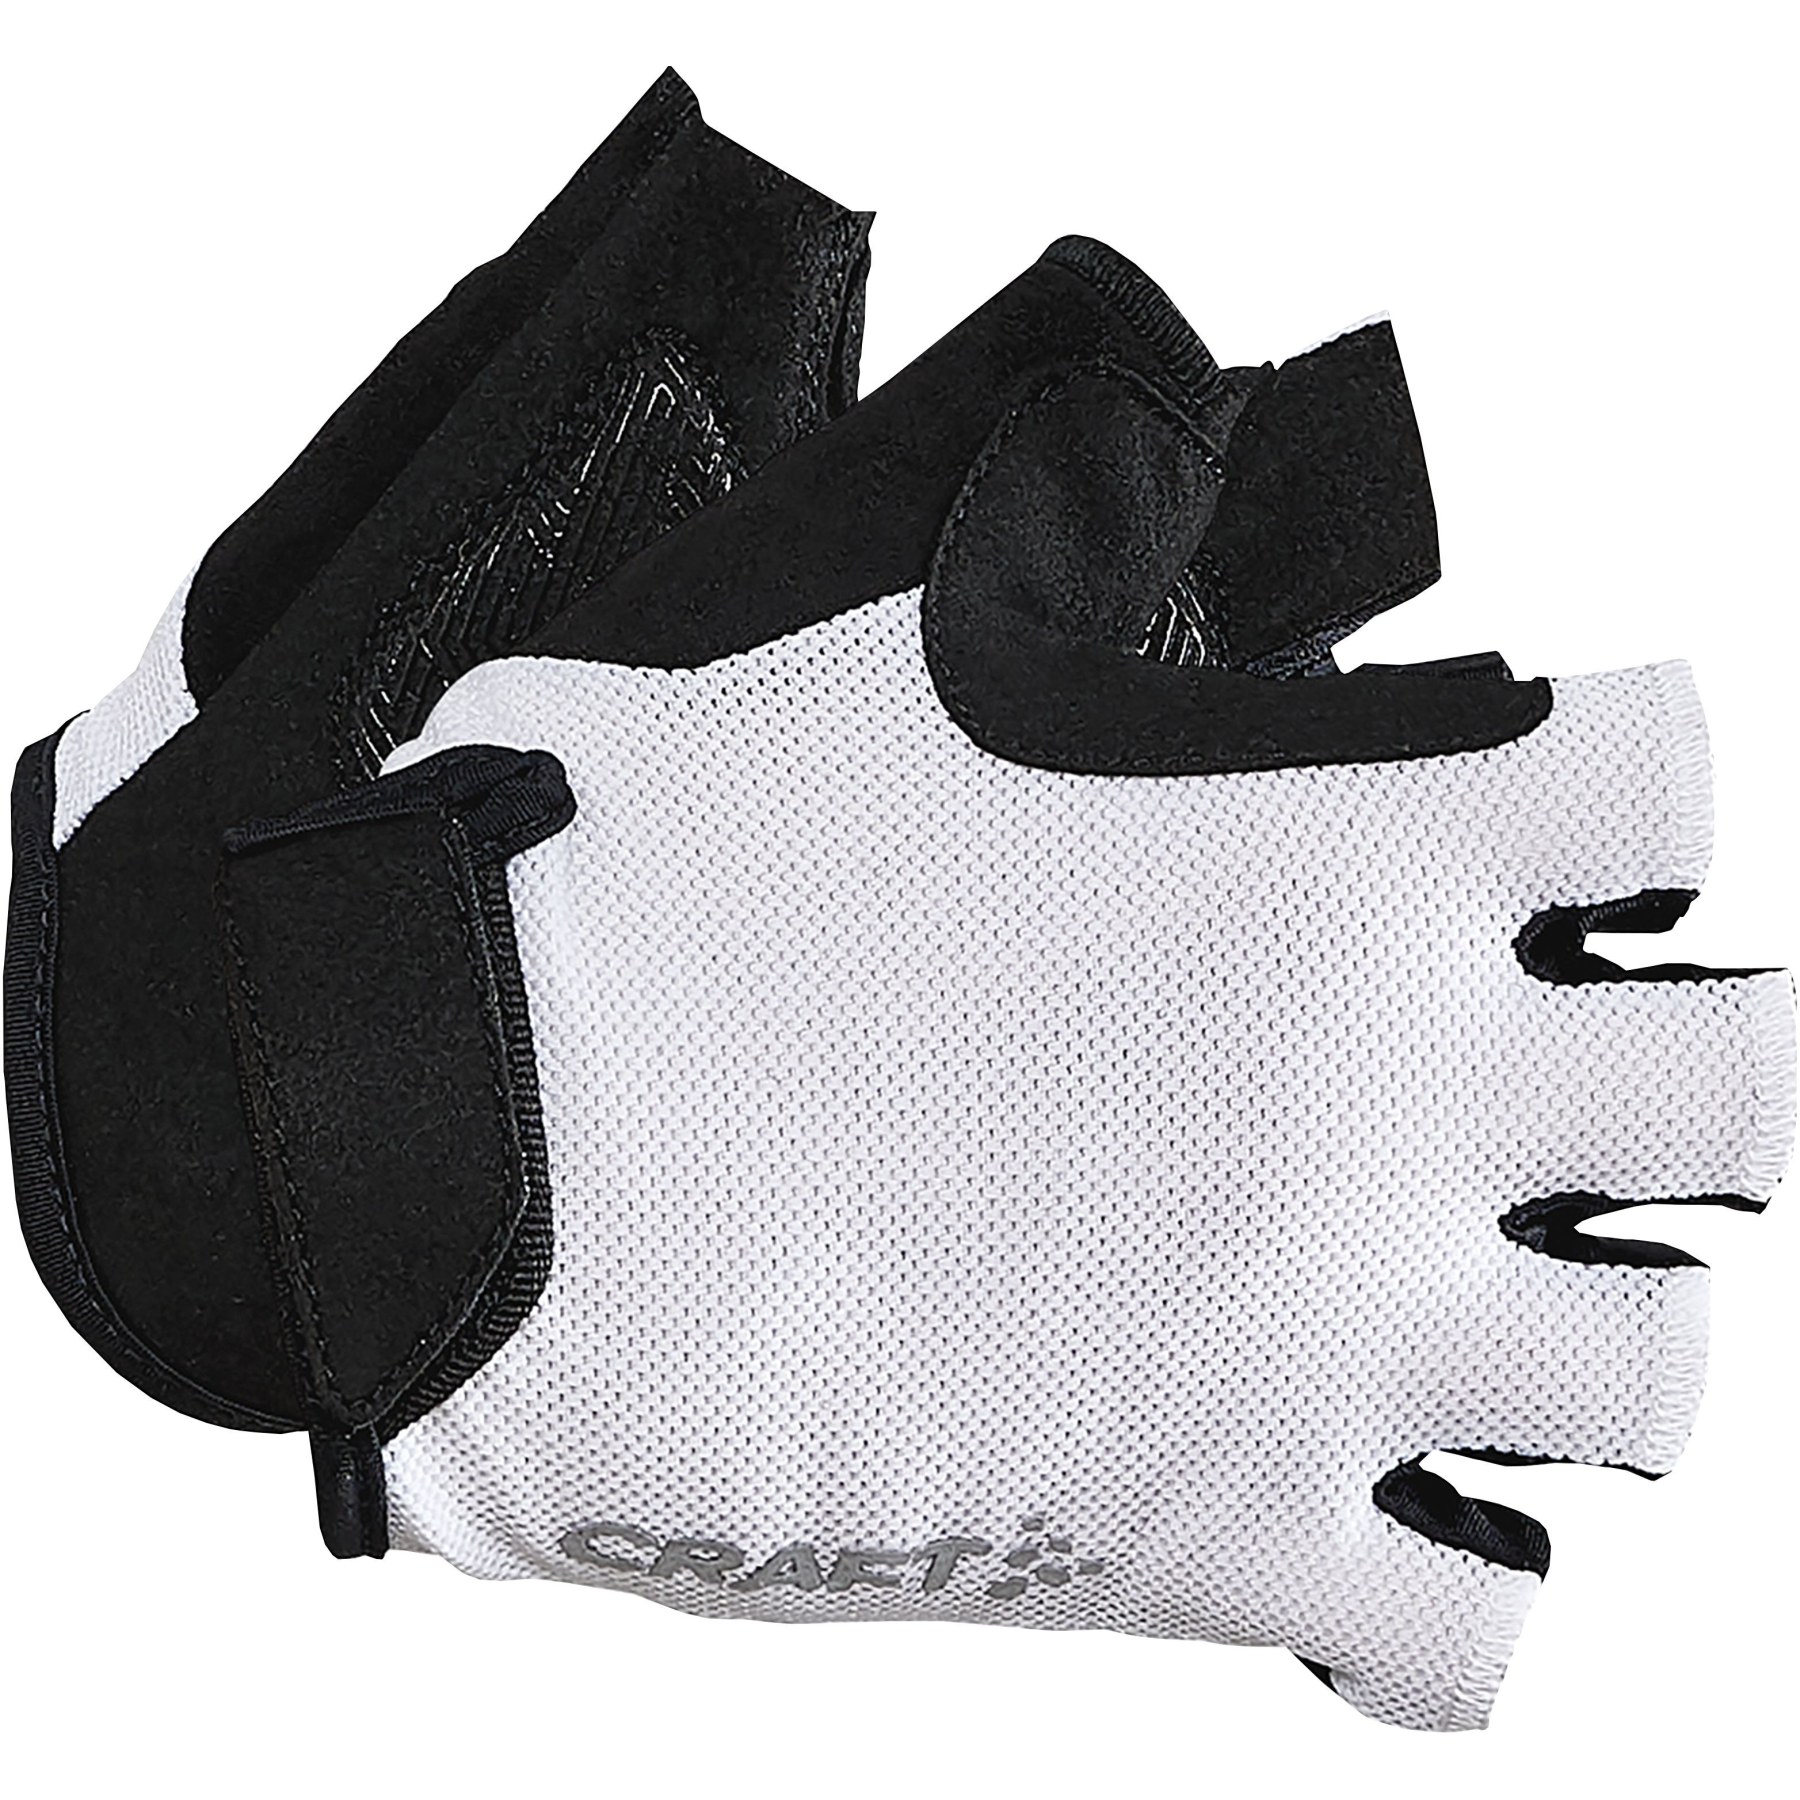 Image of CRAFT Essence Cycling Gloves - White